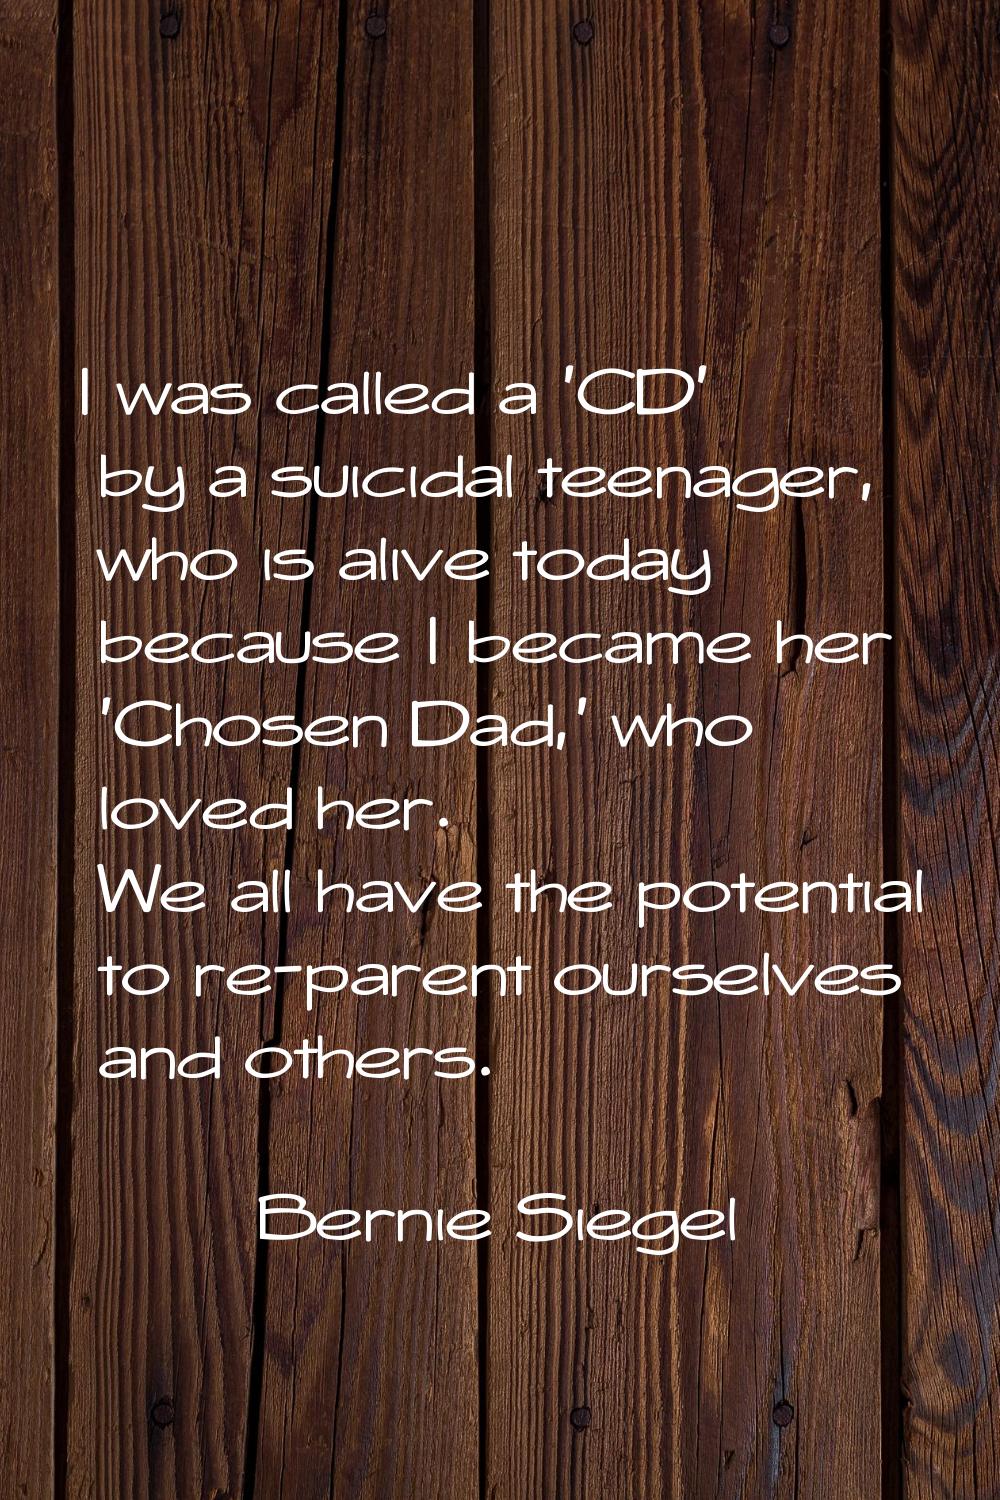 I was called a 'CD' by a suicidal teenager, who is alive today because I became her 'Chosen Dad,' w